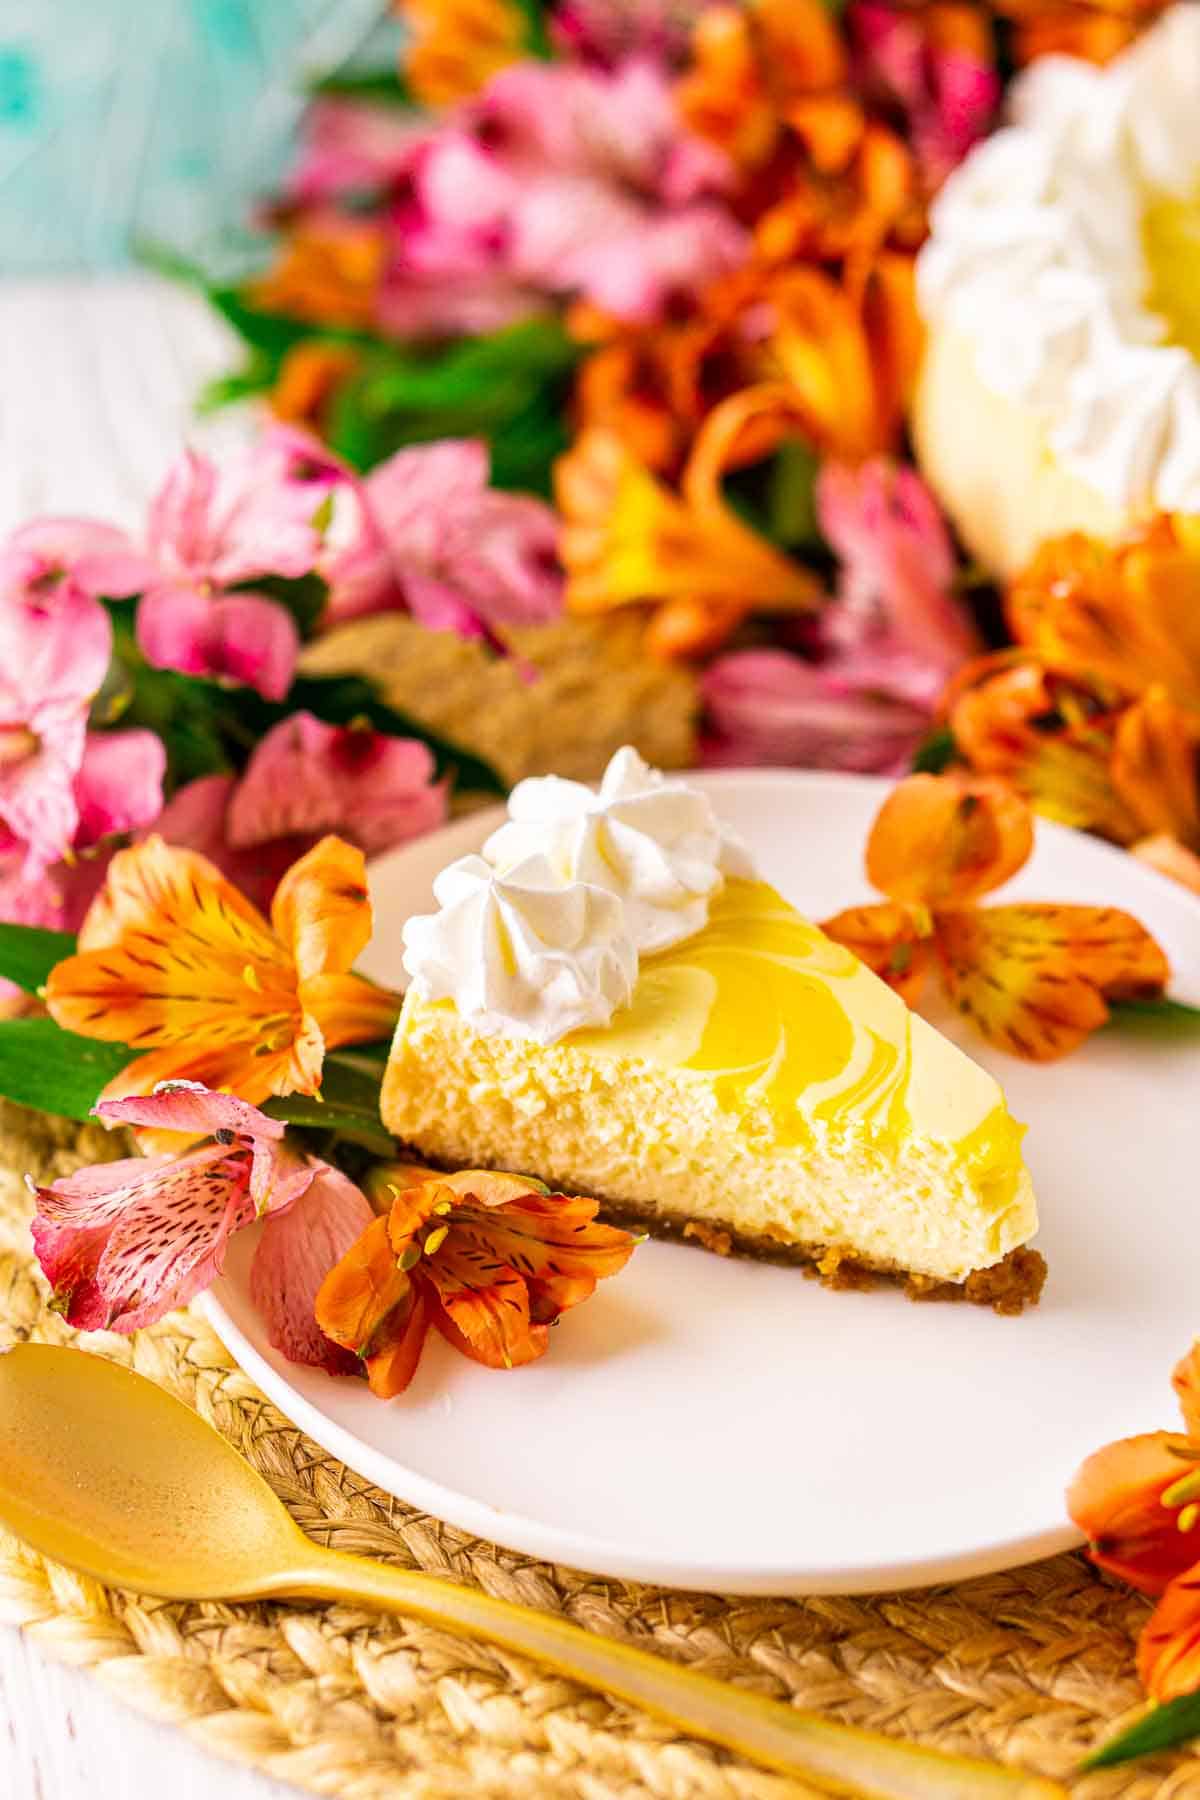 Looking down on a slice of passion fruit cheesecake on a straw placemat with colorful flowers and a blue background.